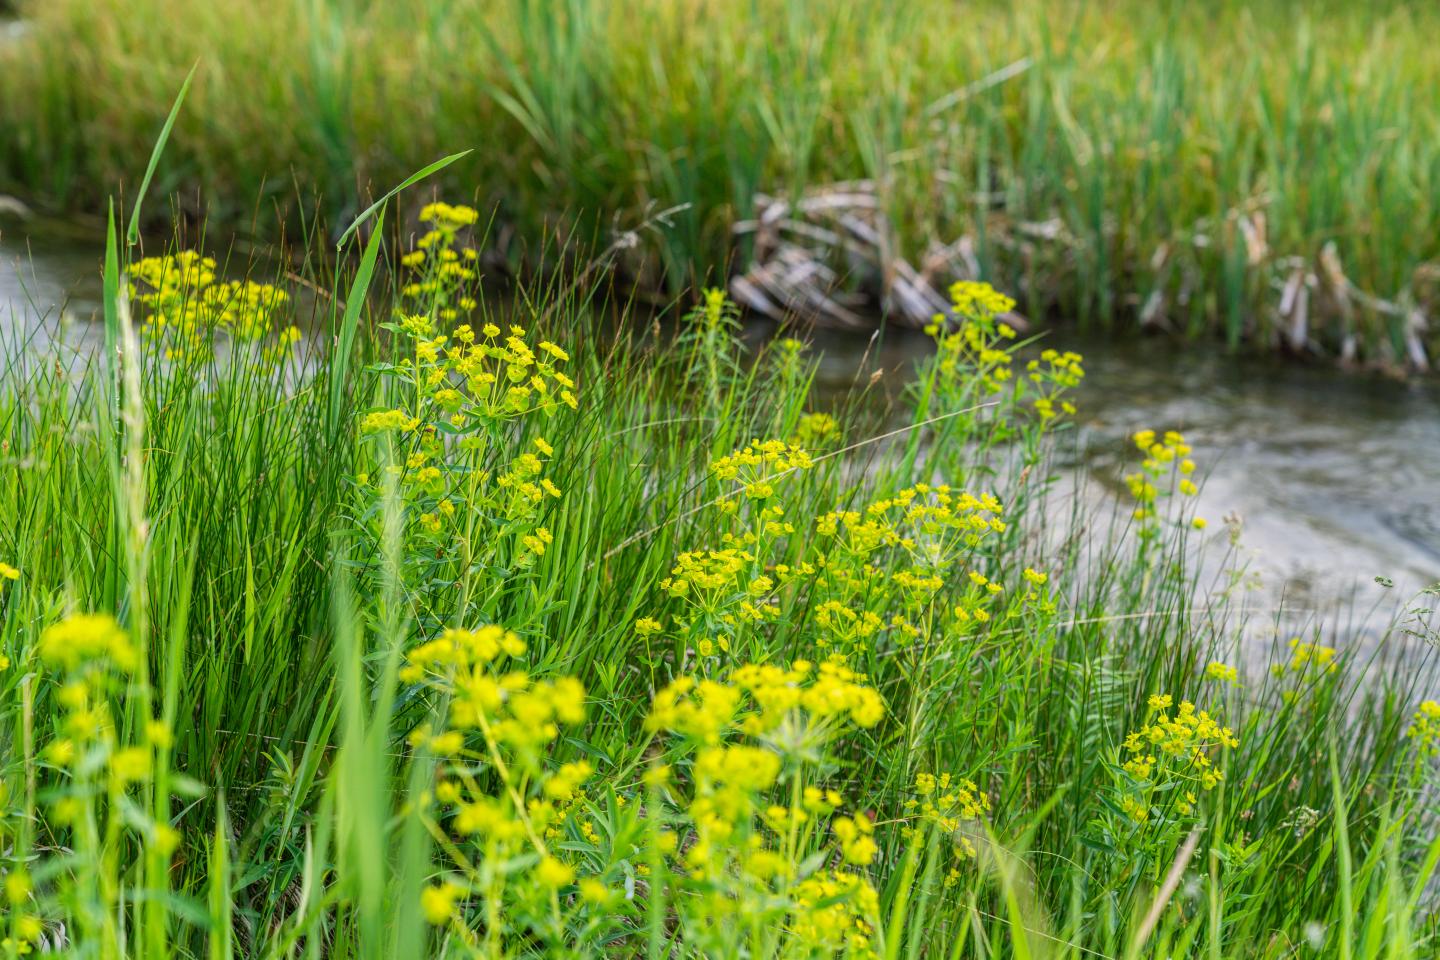 Leafy Spurge, a noxious perennial weed, has been identified as one of the top natural resouce concerns in Teton County, MT.